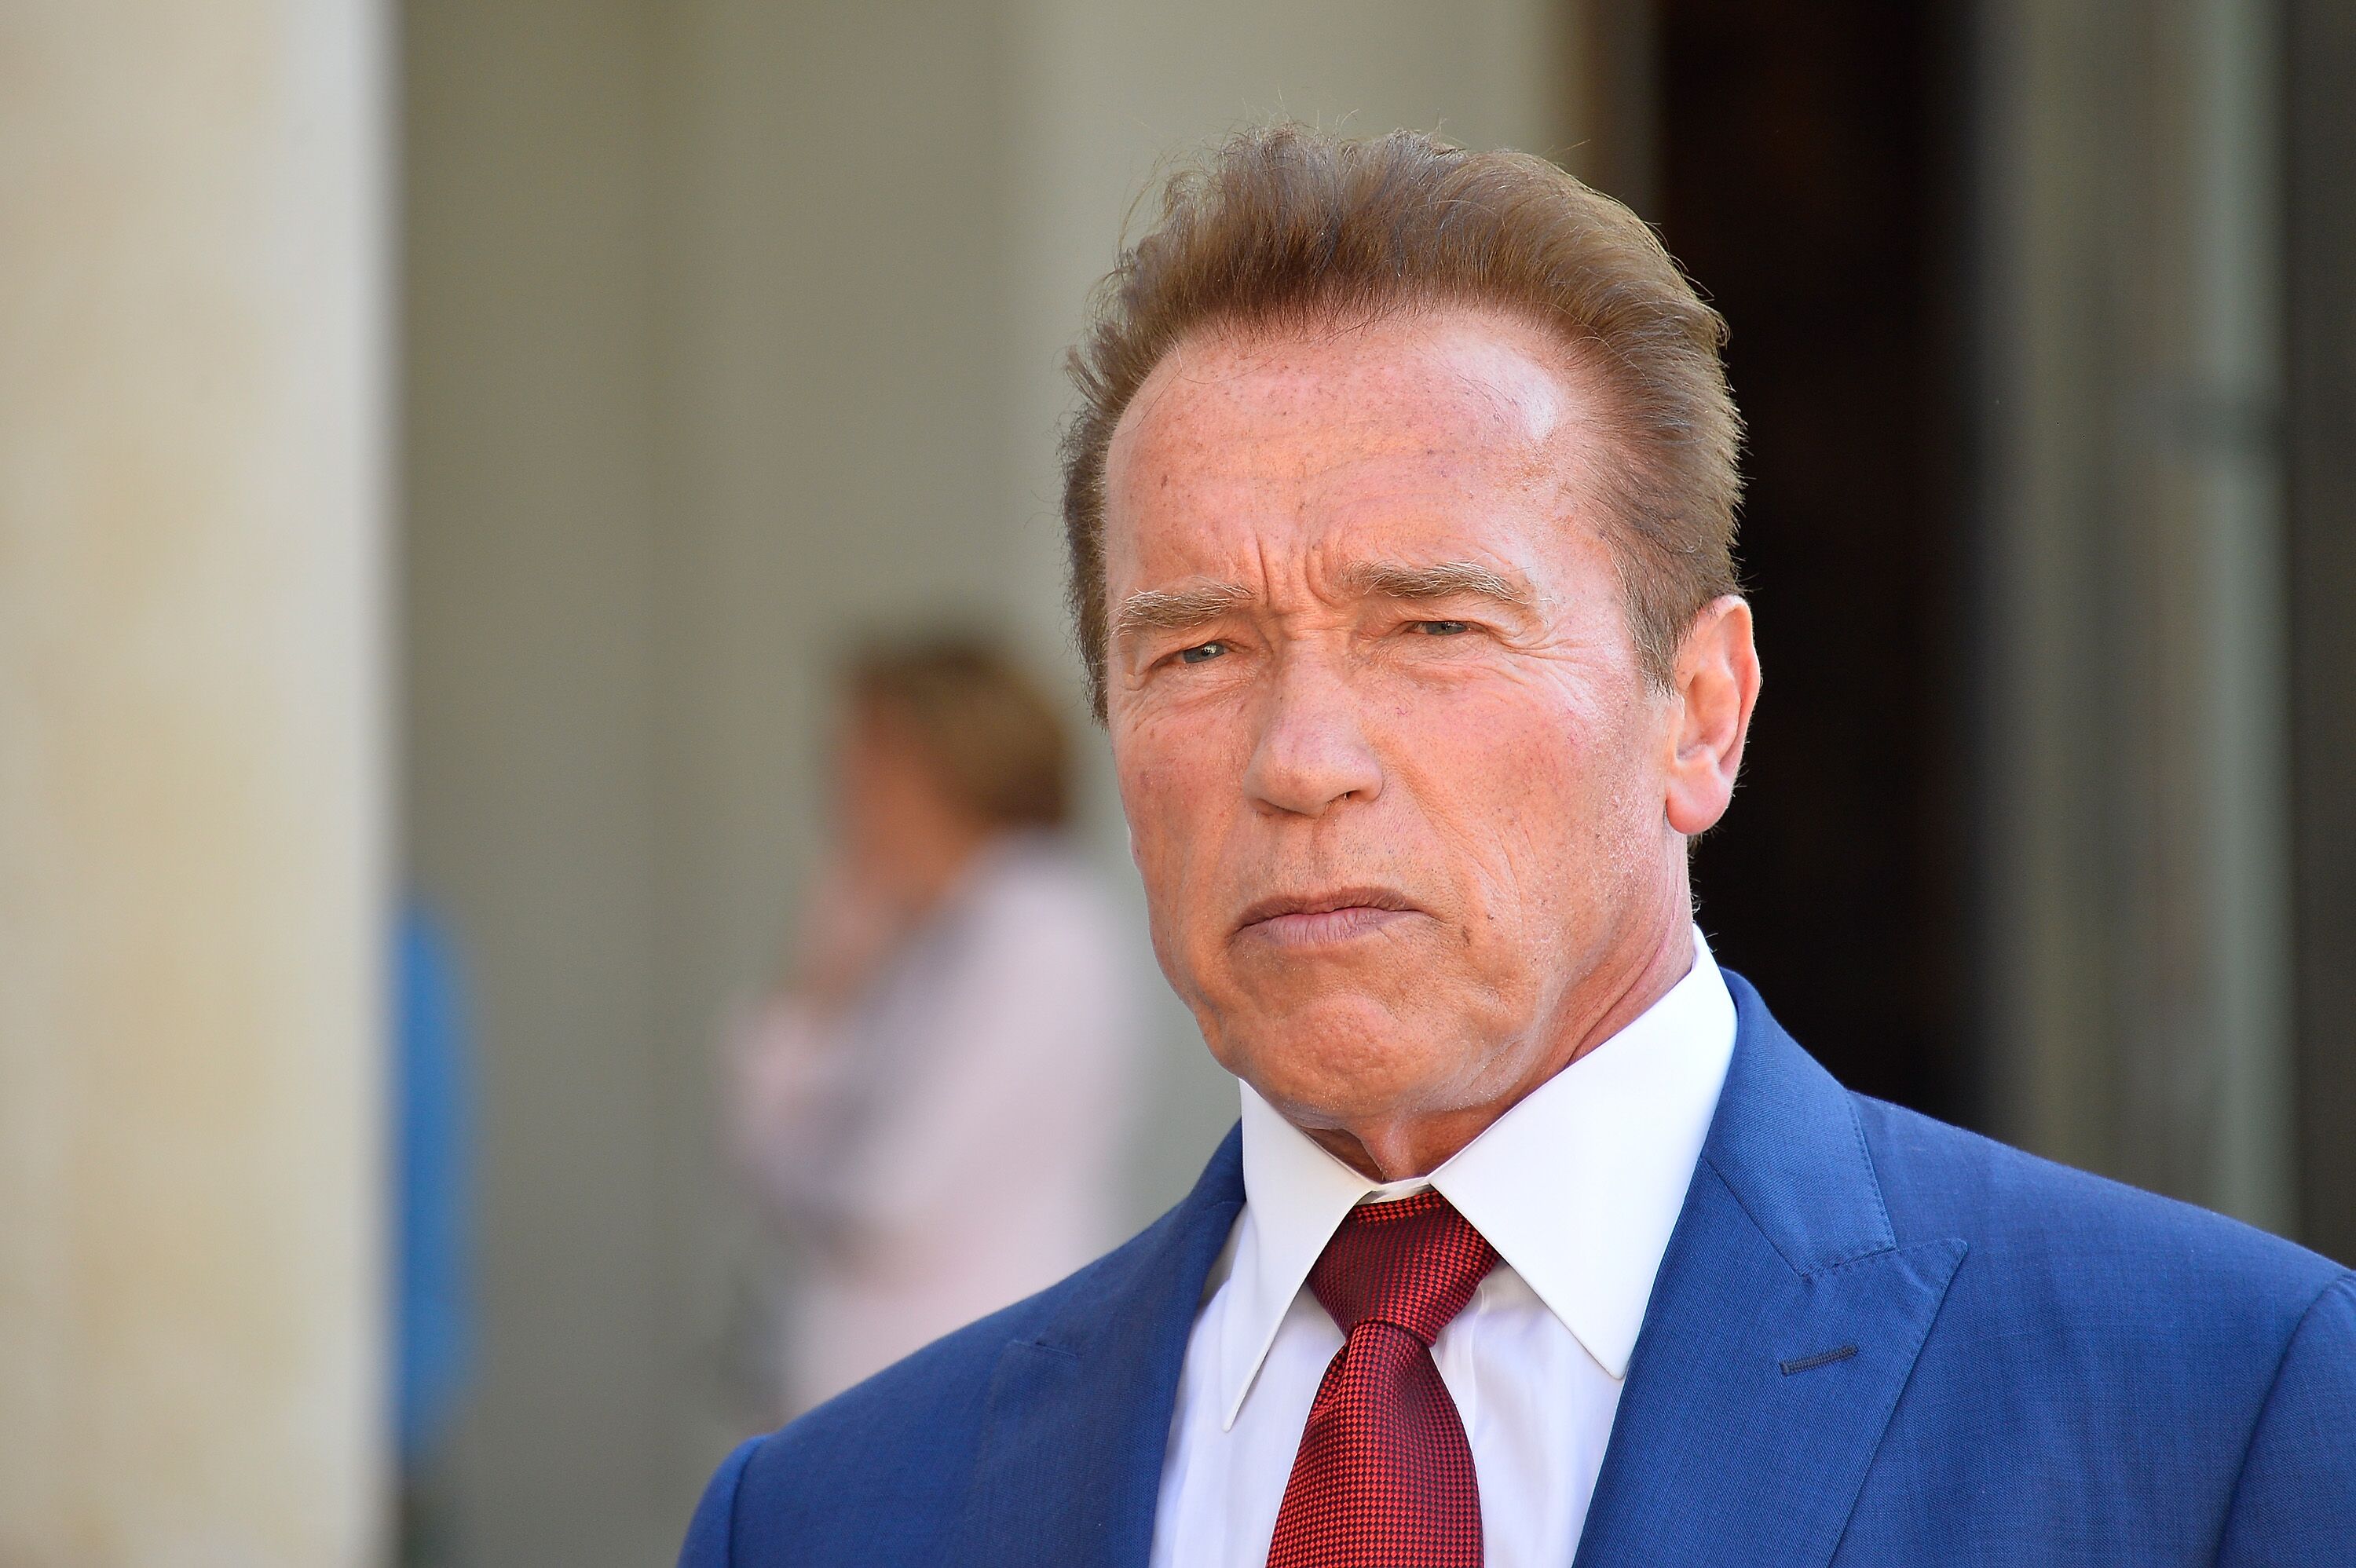 Arnold Schwarzenegger after meeting French President Emmanuel Macron at the Elysee Palace on June 23, 2017. | Photo: Getty Images